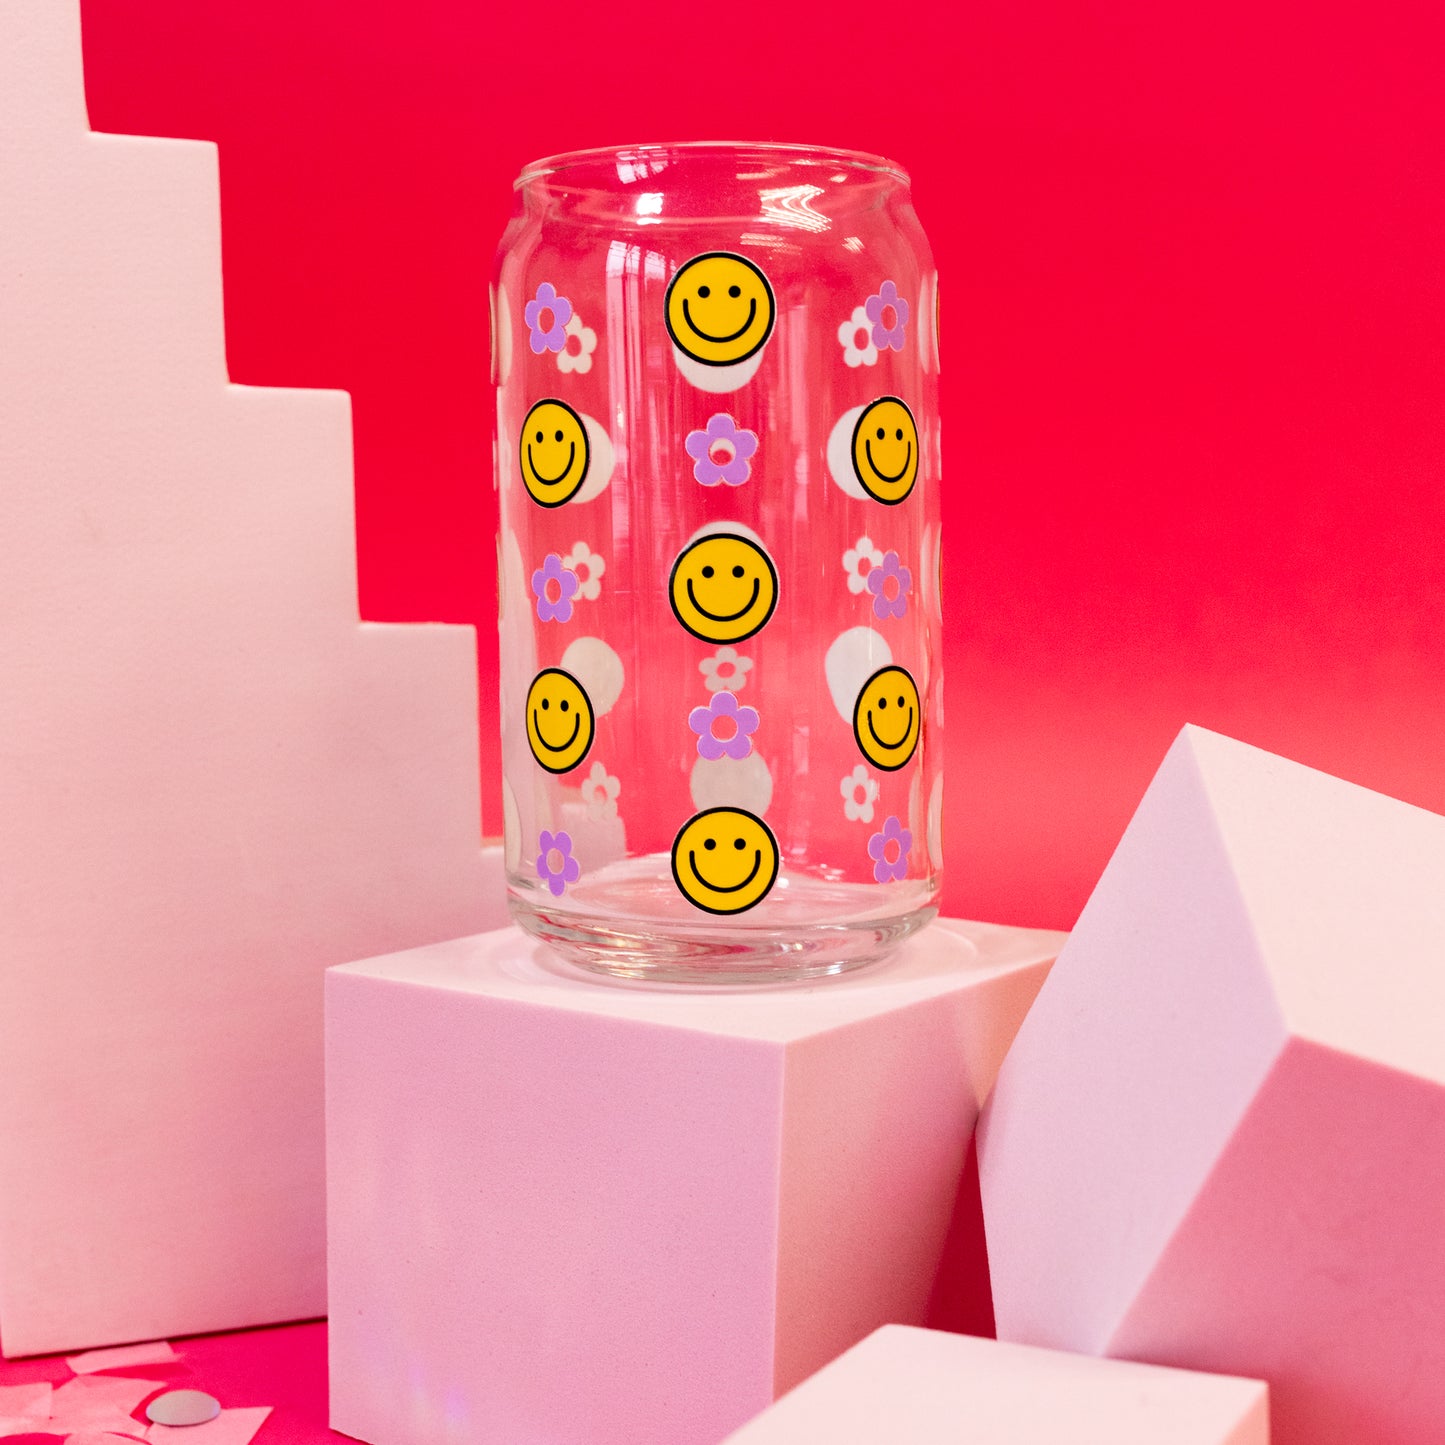 yellow smiley faces with purple daises beer can glass